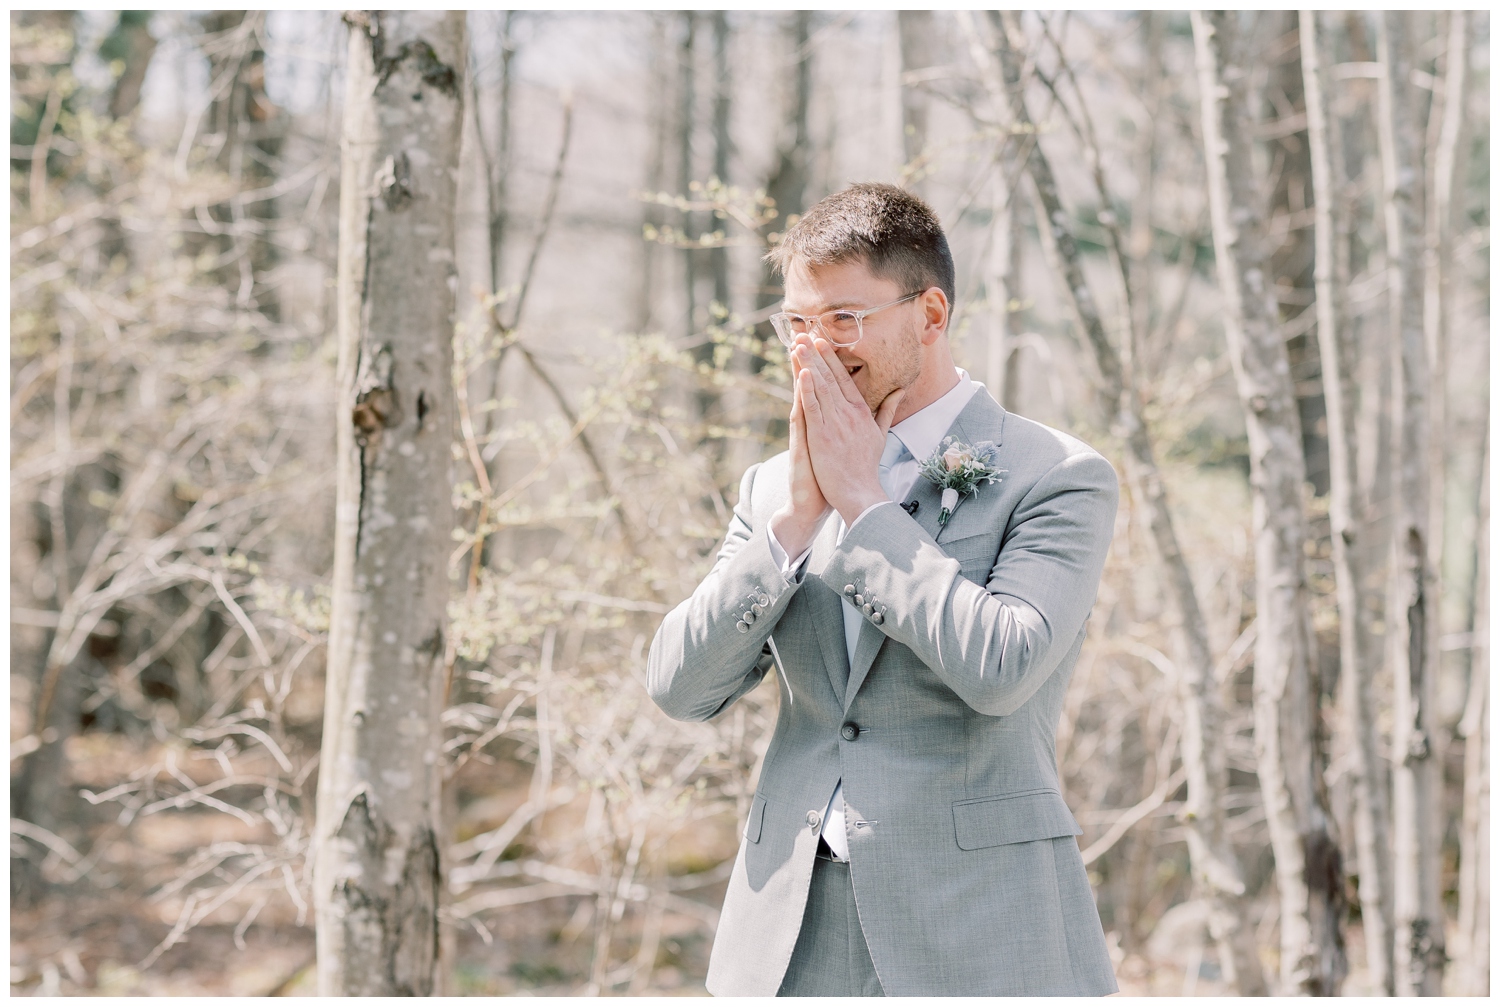 Groom's reaction to seeing his bride for the first time on their wedding day. This Windham Manor wedding was photographed by Nicole Weeks Photography in a light and airy style. 
